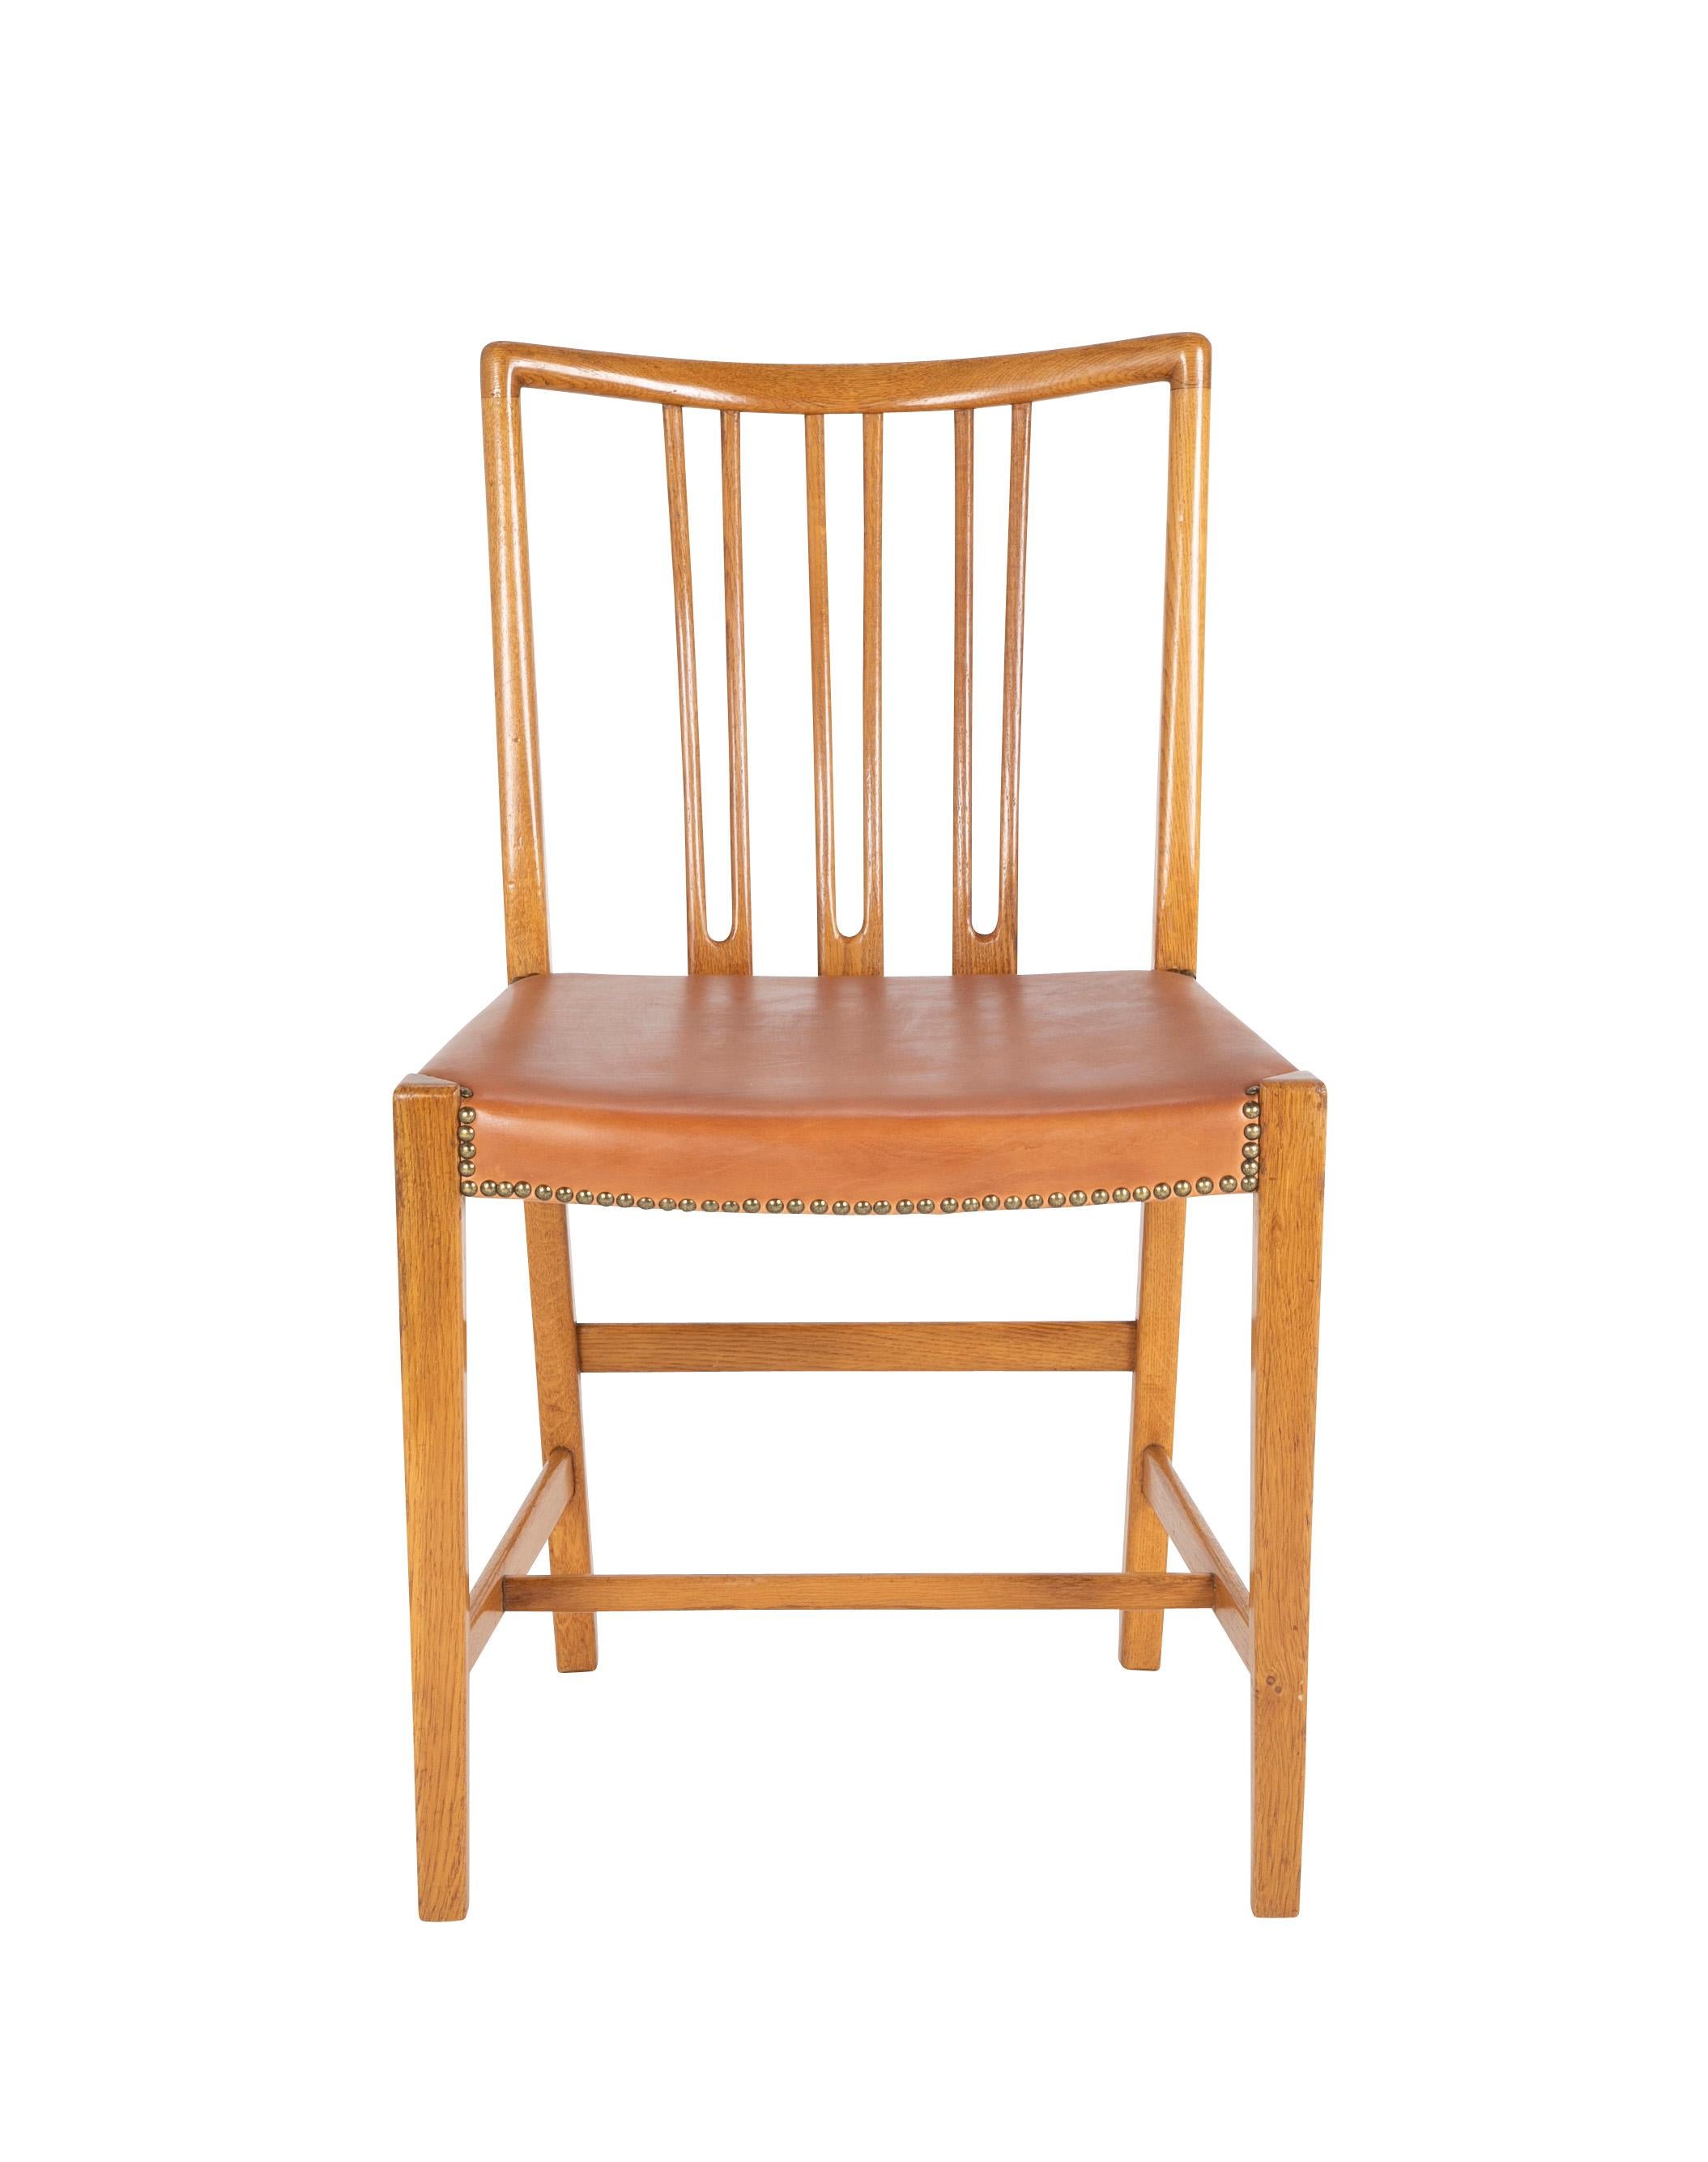 A set of 8 Hans Wegner bleached mahogany dining chairs with cognac leather seats with nail head trim. With mark to underside of apron.